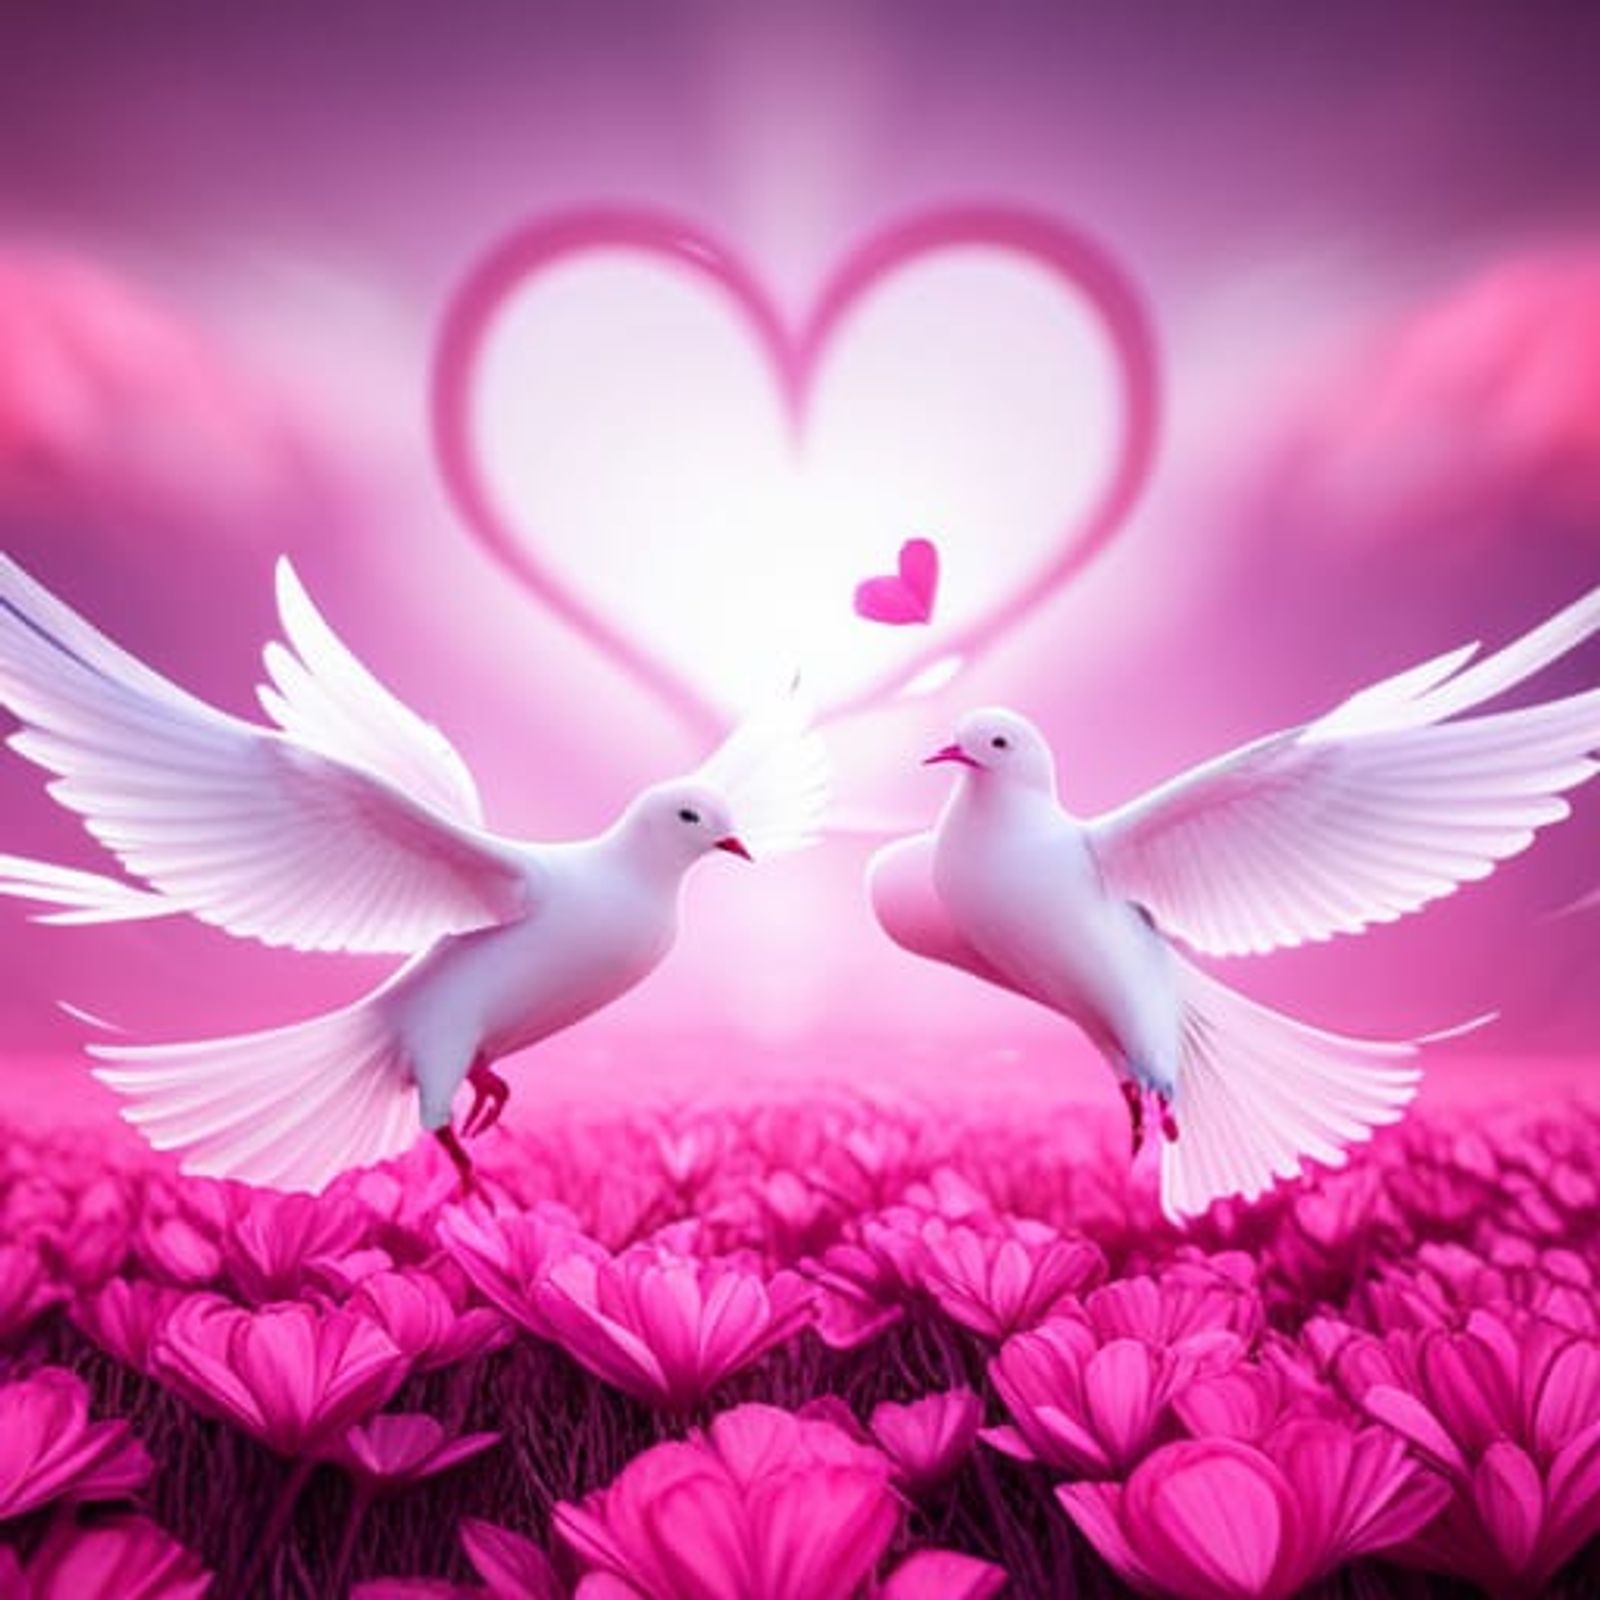 real love doves